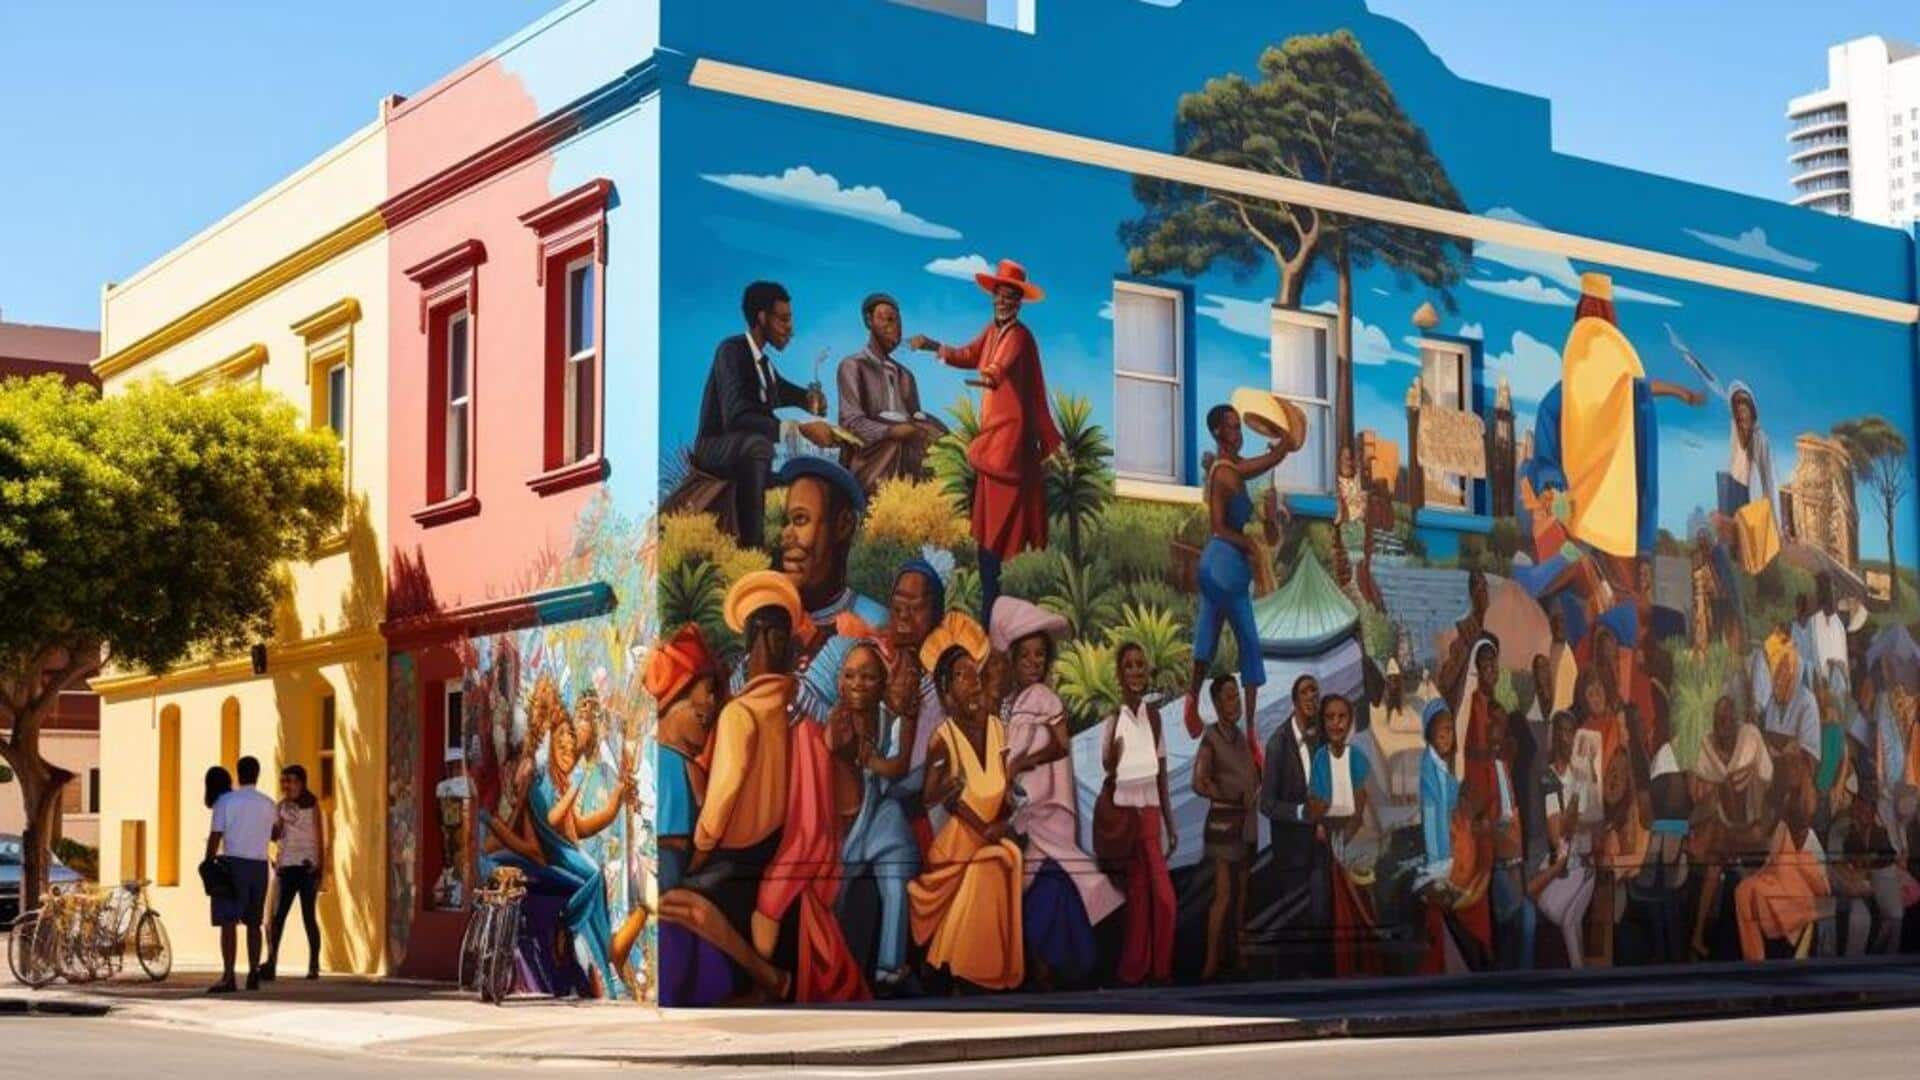 Discover Cape Town's artistic expression with this things-to-do guide